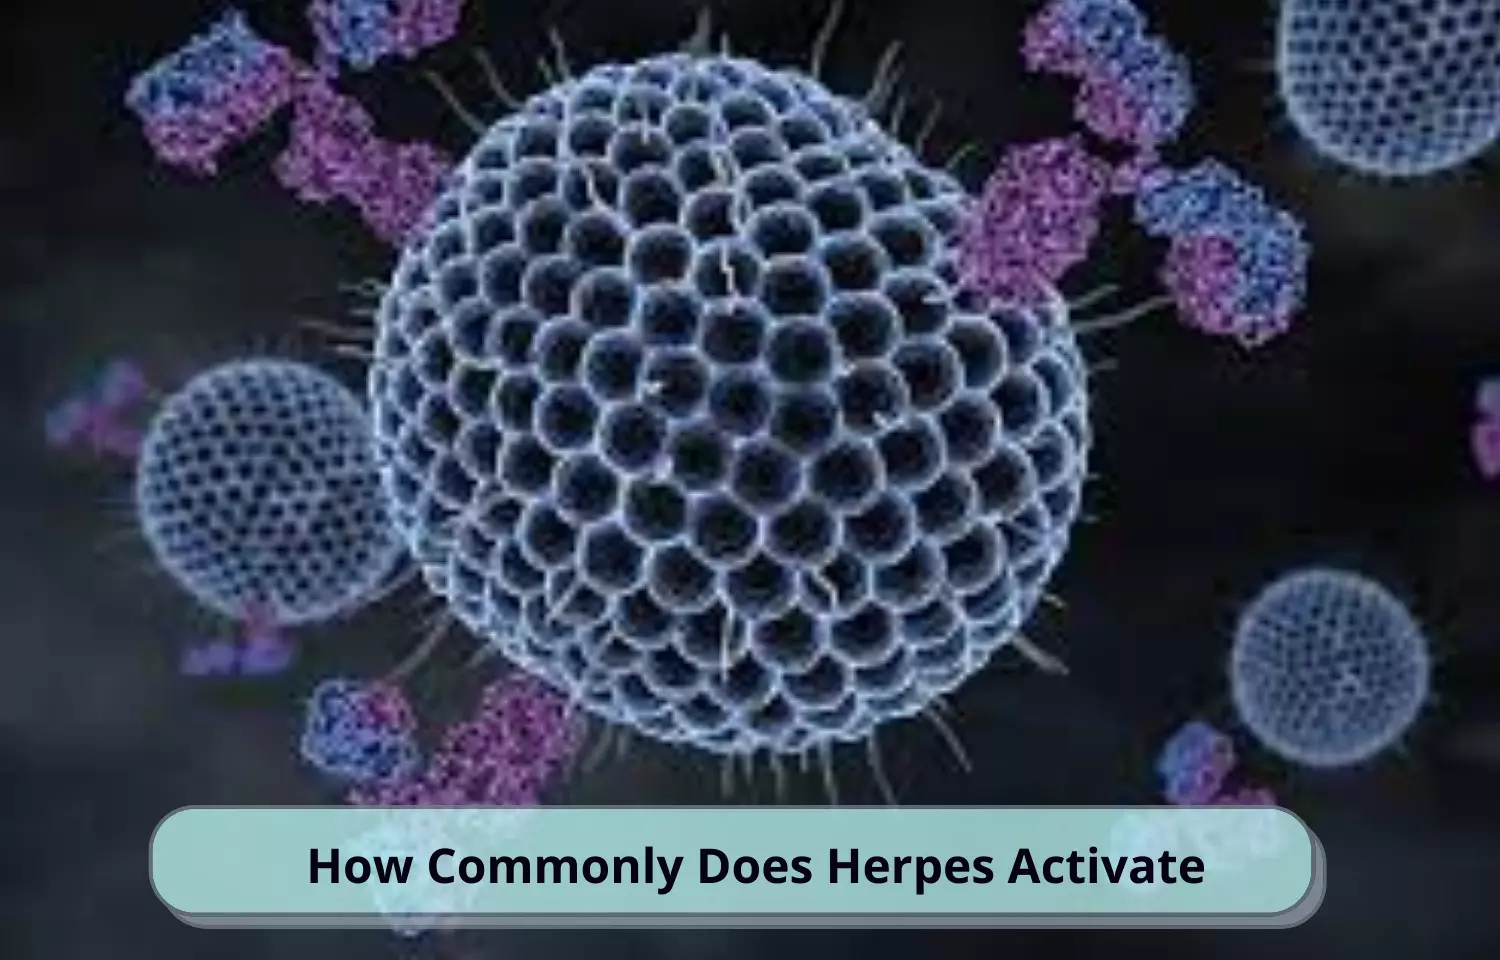 Journal Club - How Commonly Does Herpes Activate